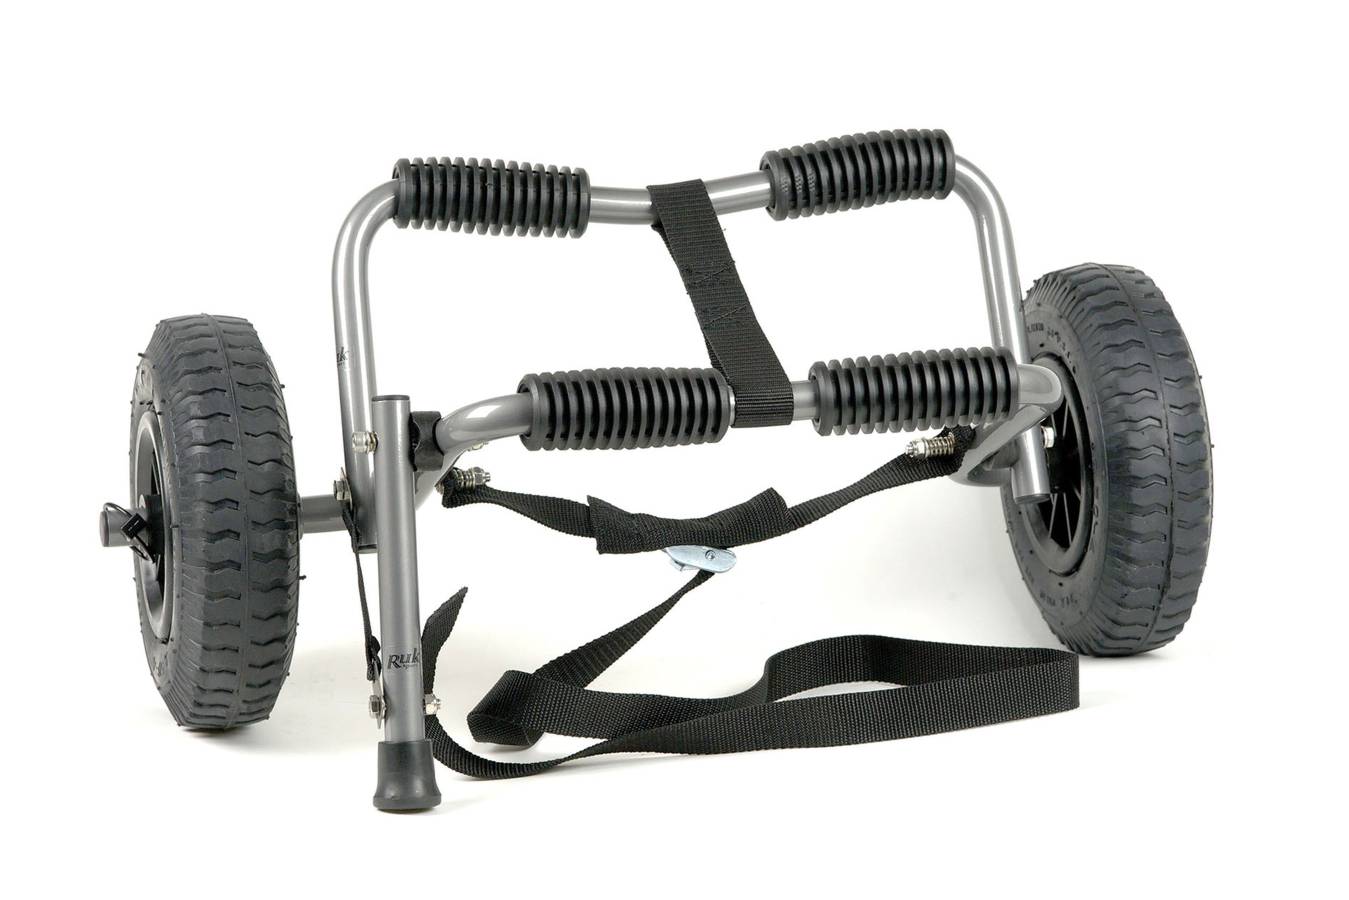 Compact folding trolley for a kayak or canoe, with puncture-proof tyres